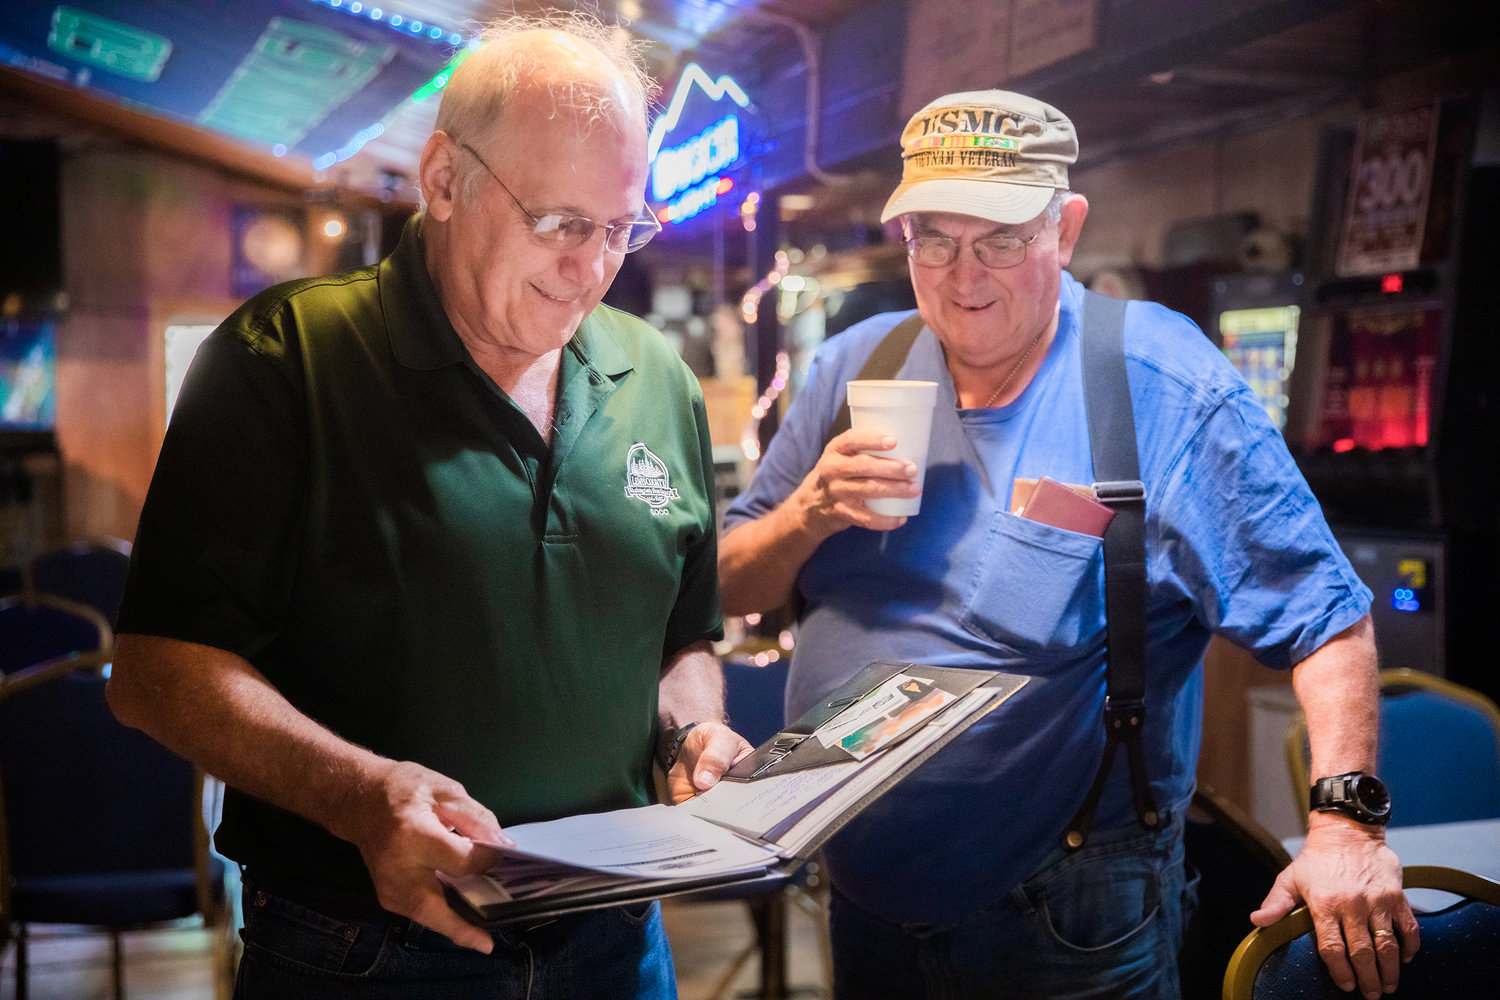 Commissioner Lee Grose laughs and talks with George Schaefer, a U.S. Marine Corps veteran, last August in Randle at the Tall Timber Restaurant.